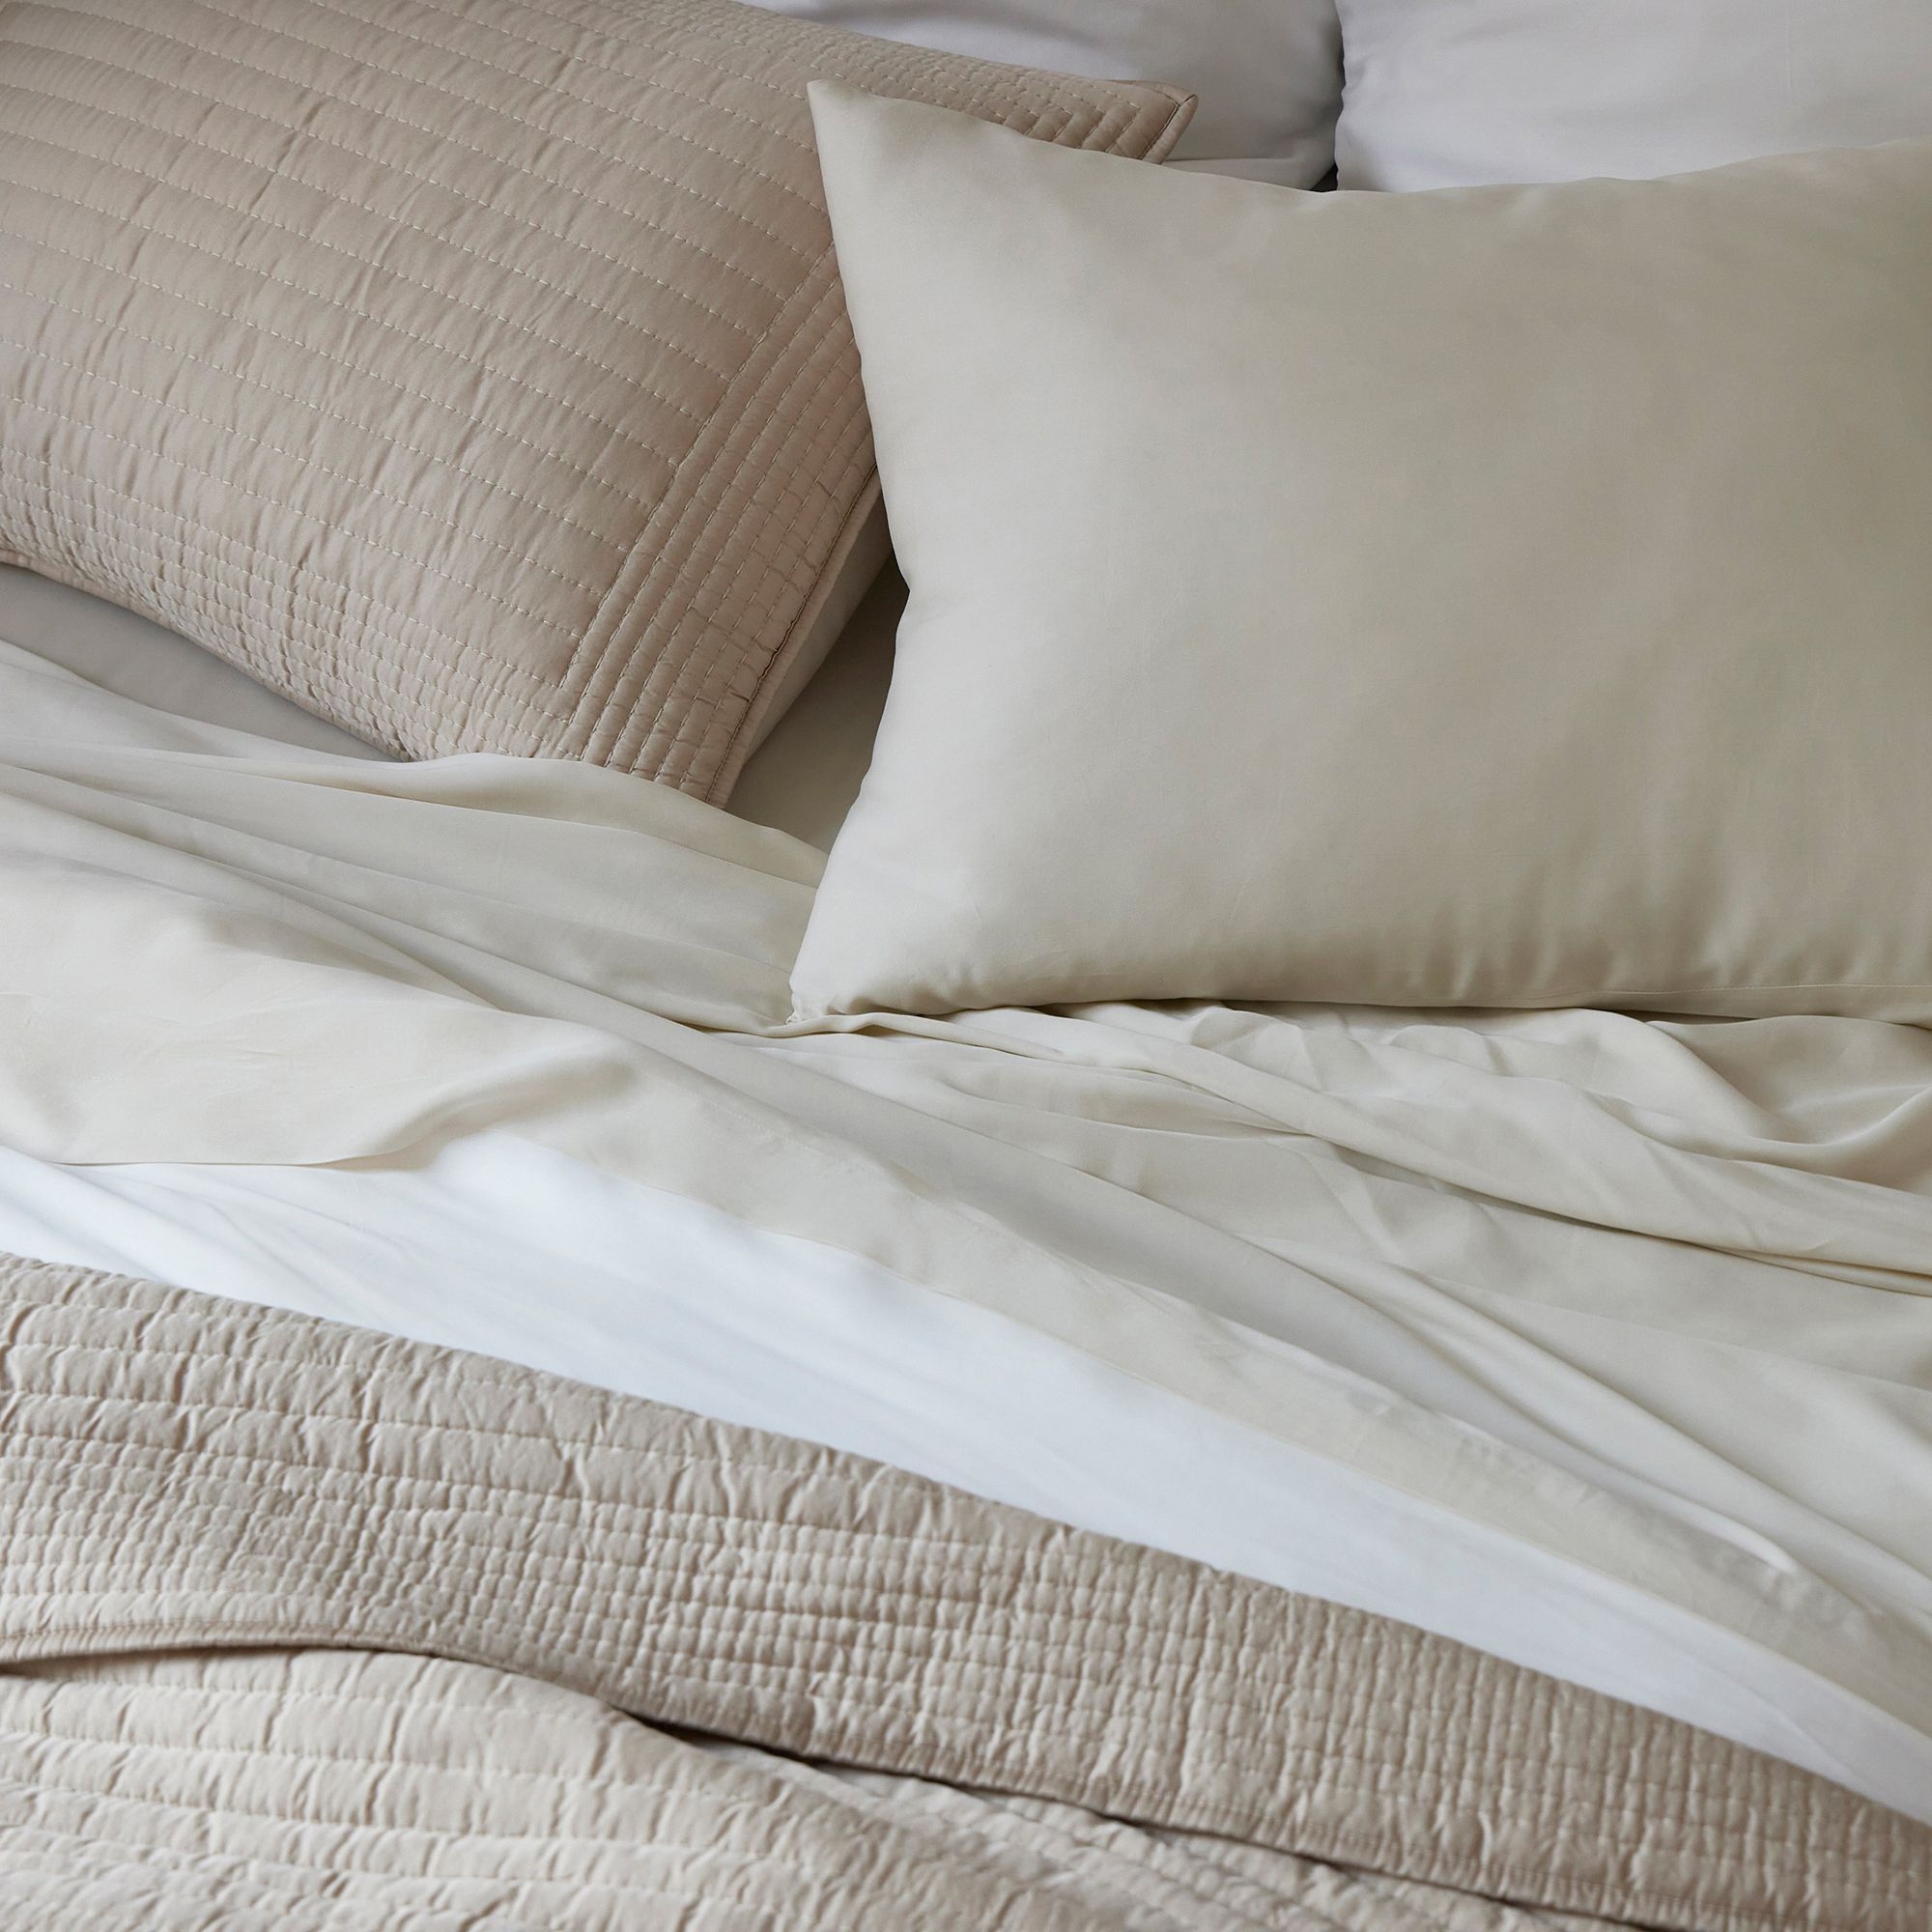 A bed made in neutral Tencel bedding.